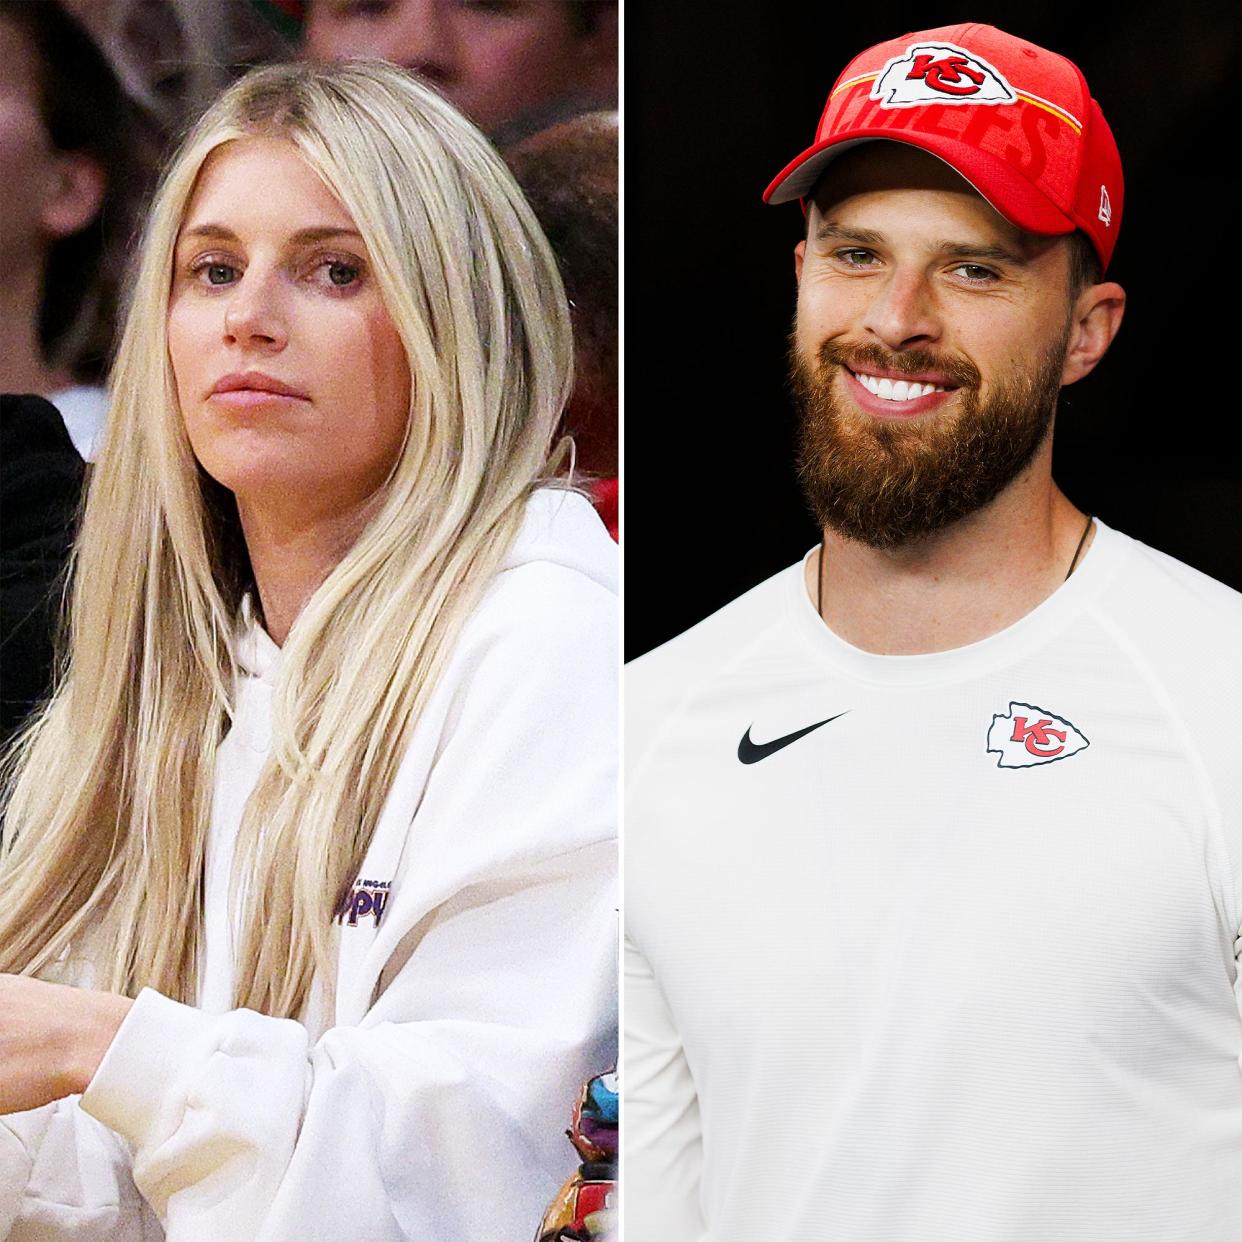 Kelly Stafford Thinks Harrison Butkers Comments About IVF Foster Imposter Syndrome for Women